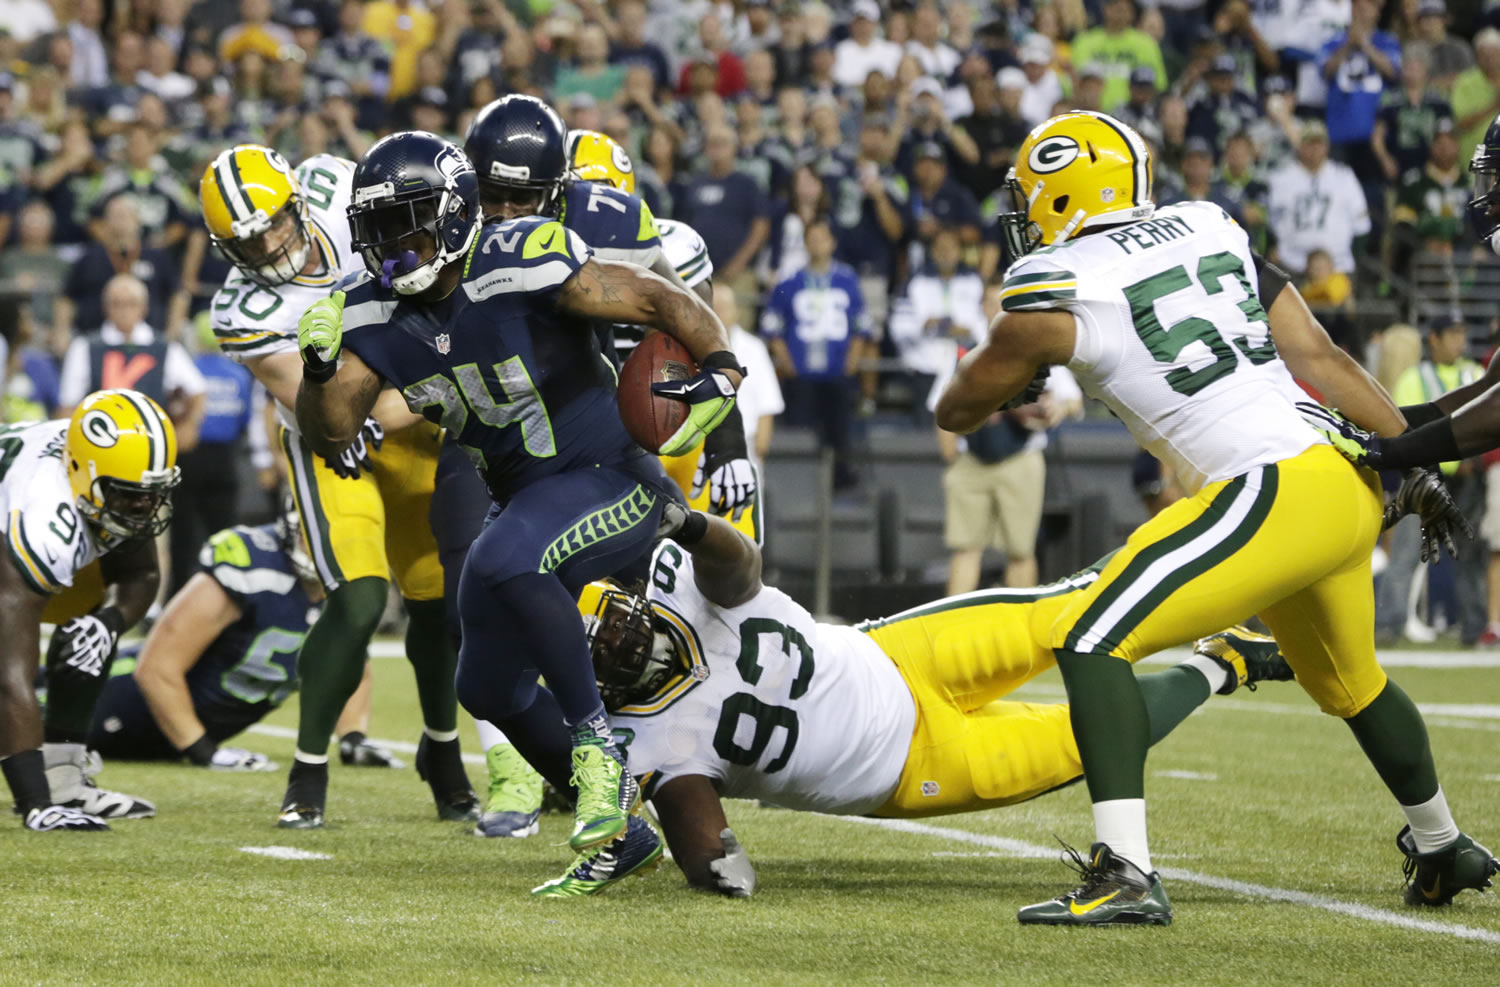 Seattle Seahawks running back Marshawn Lynch, left, runs for a touchdown against the Green Bay Packers in the second half of an NFL football game, Thursday, Sept. 4, 2014, in Seattle.